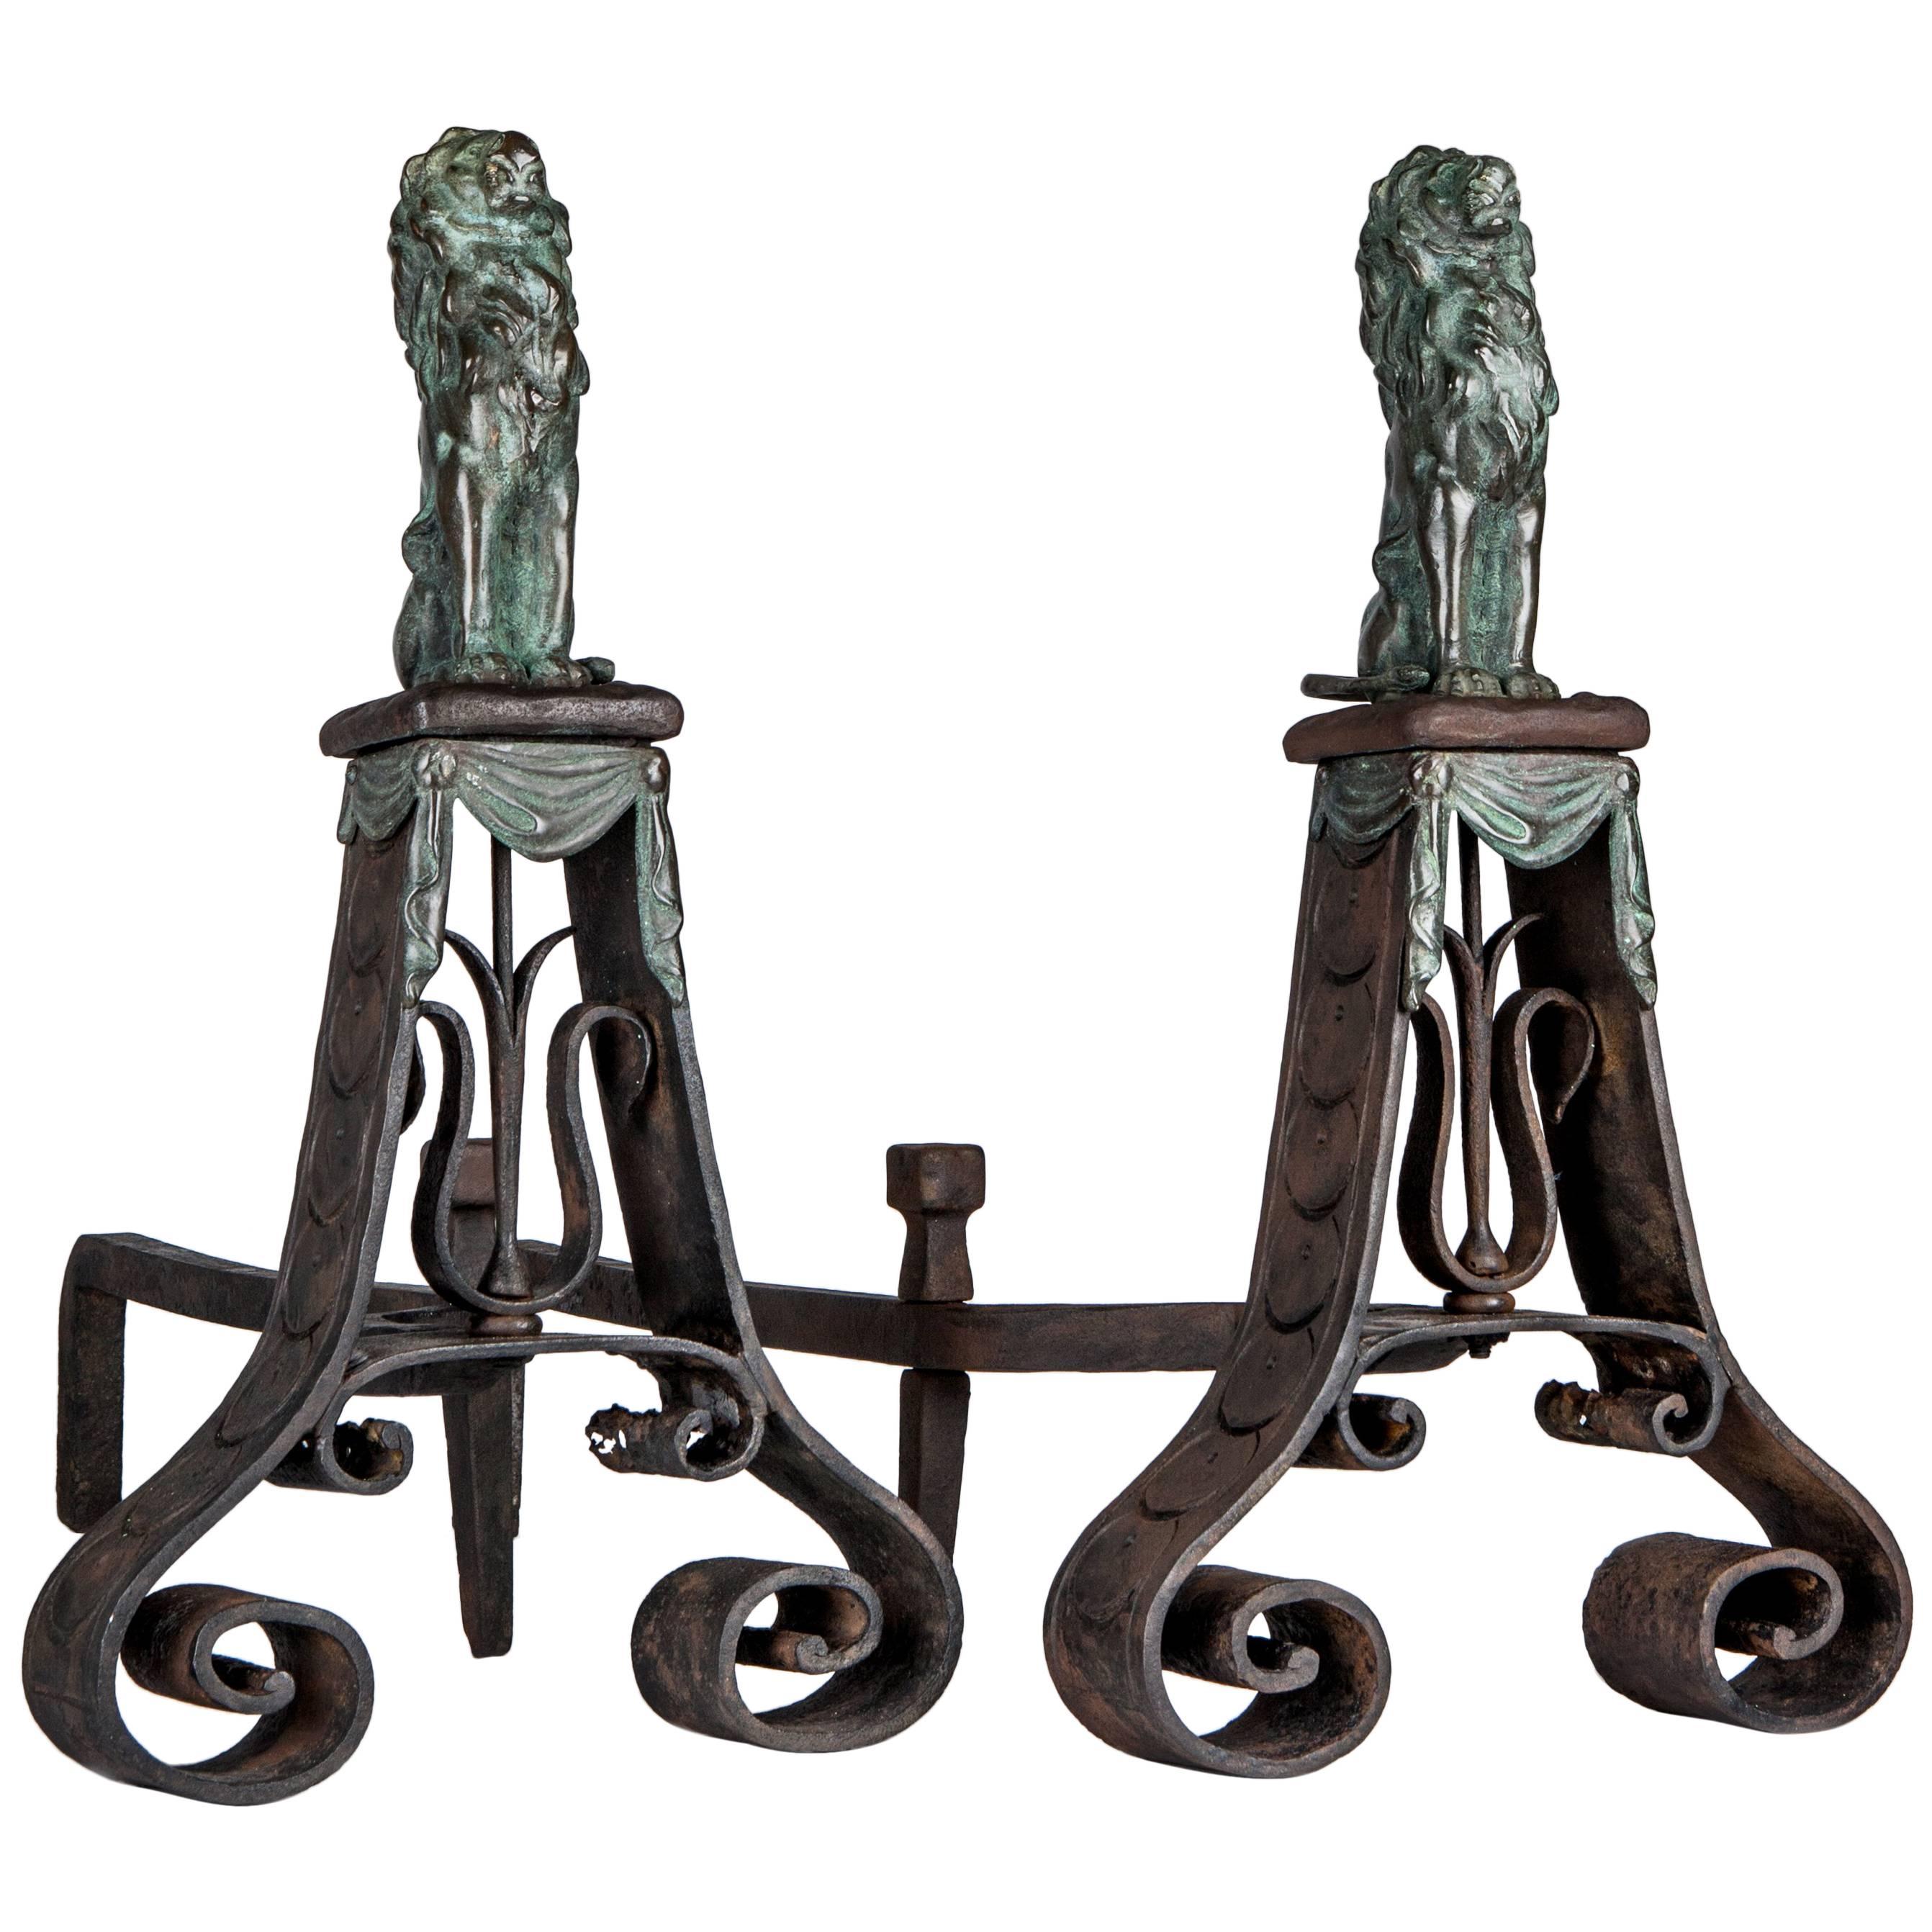 Wrought Iron Andirons with Cast Bronze Lions in a Verdigris Patina, Circa 1910s For Sale